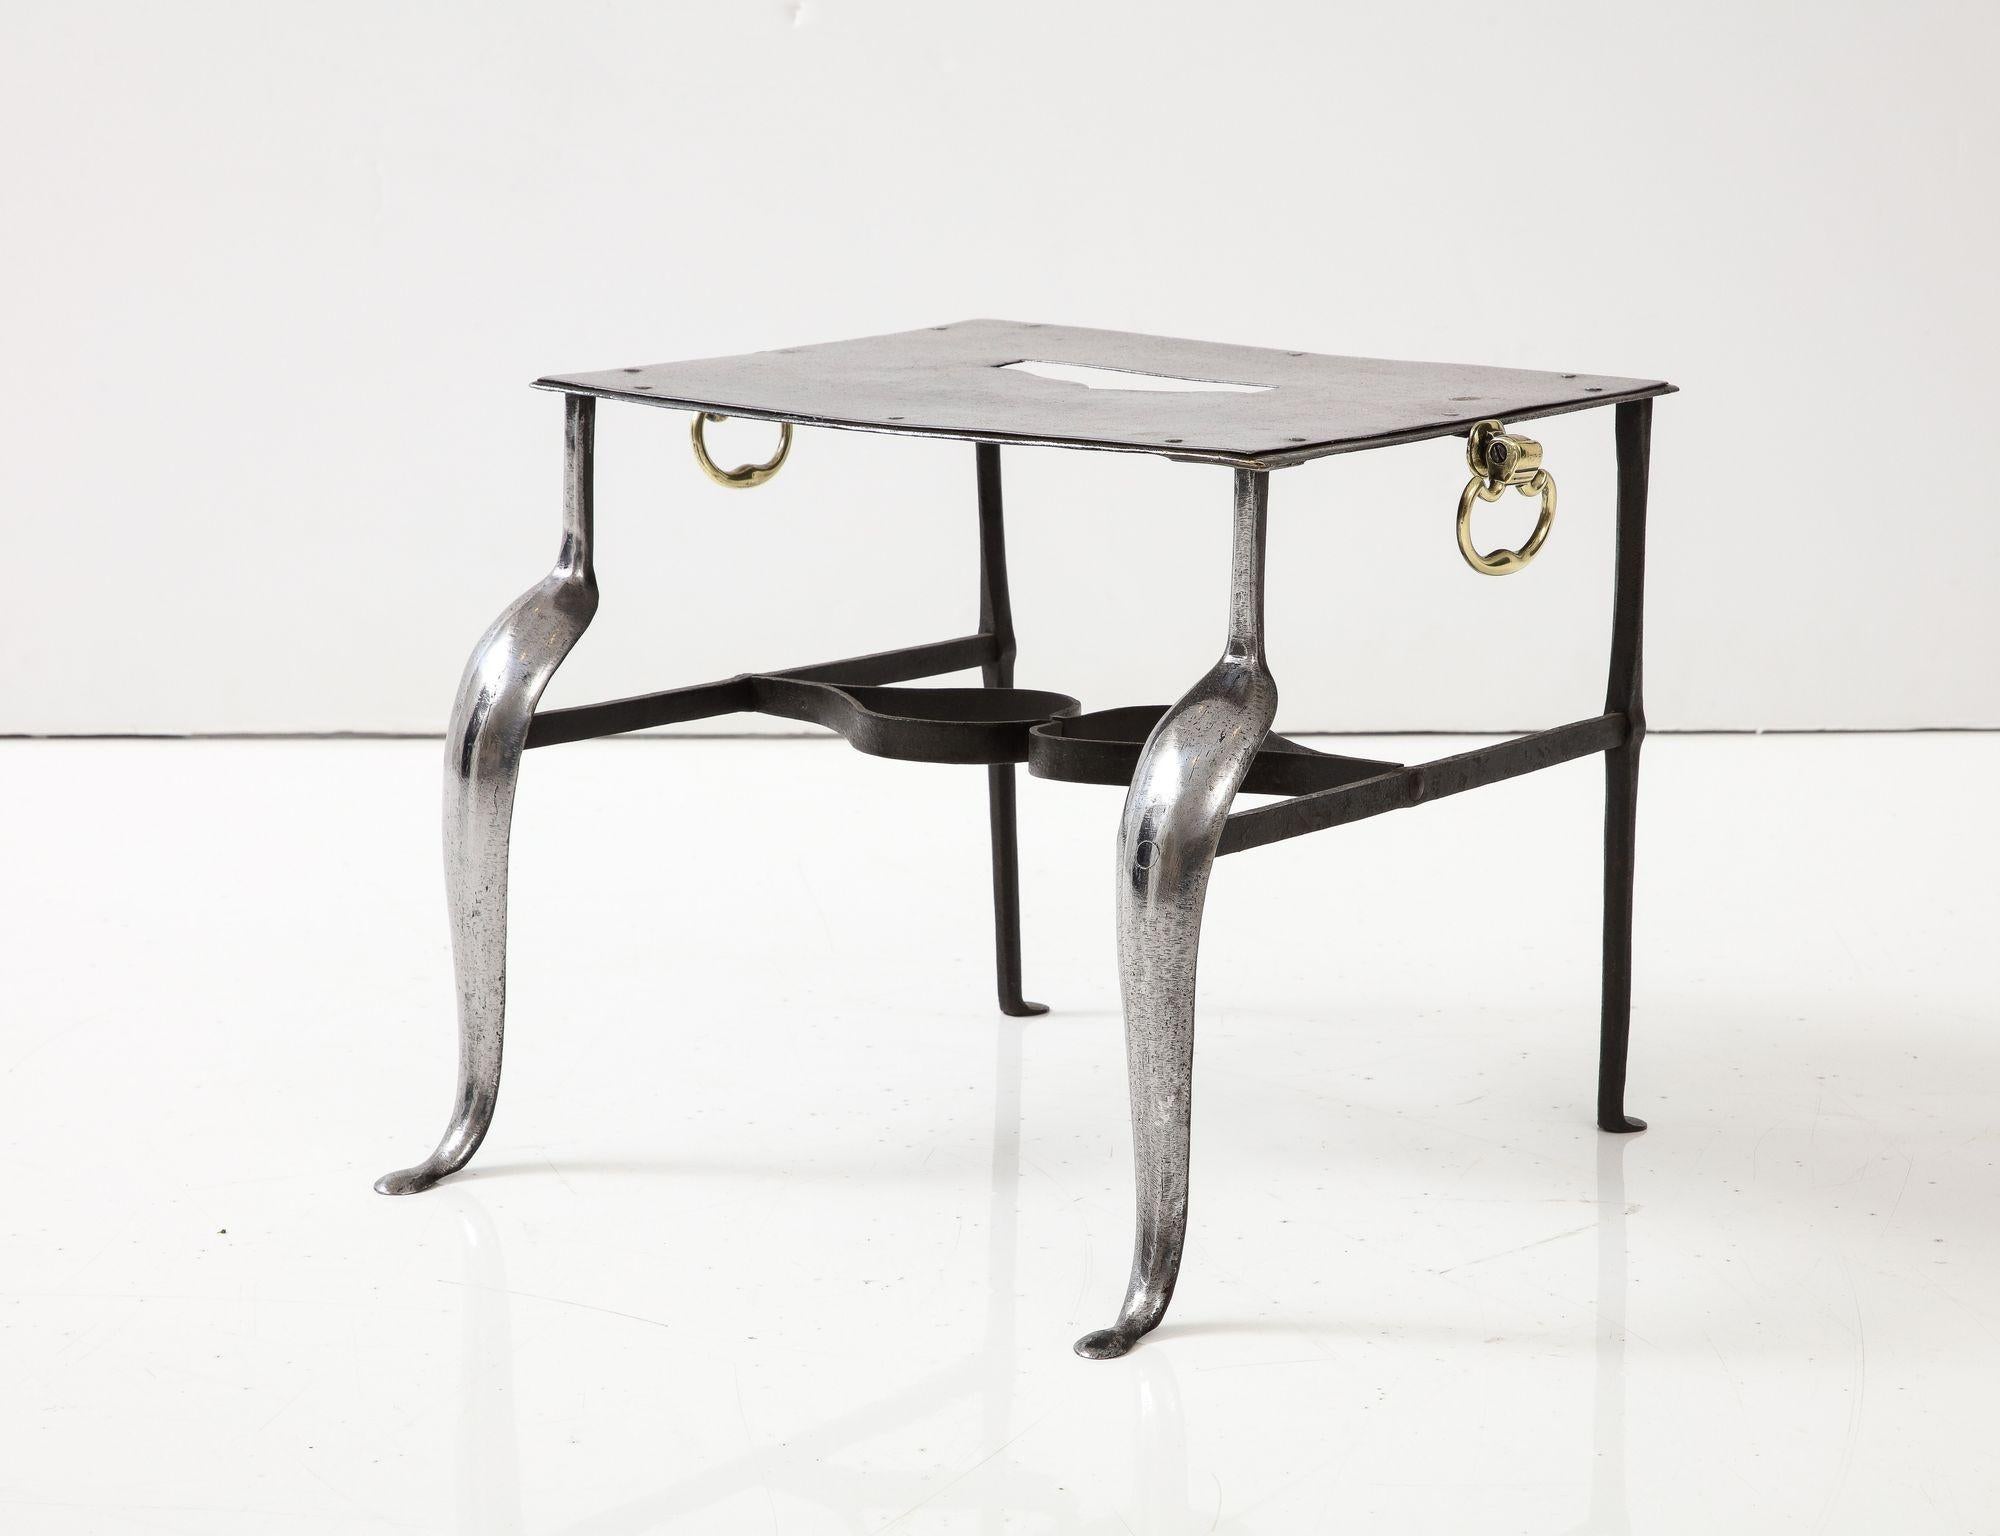 A polished steel stand originally used to hold hot kettles and pots next to a fireplace and known as a trivet.  Rectangular polished top with ogee cutout handle on polished steel cabriole front legs with wrought iron H stretcher featuring double